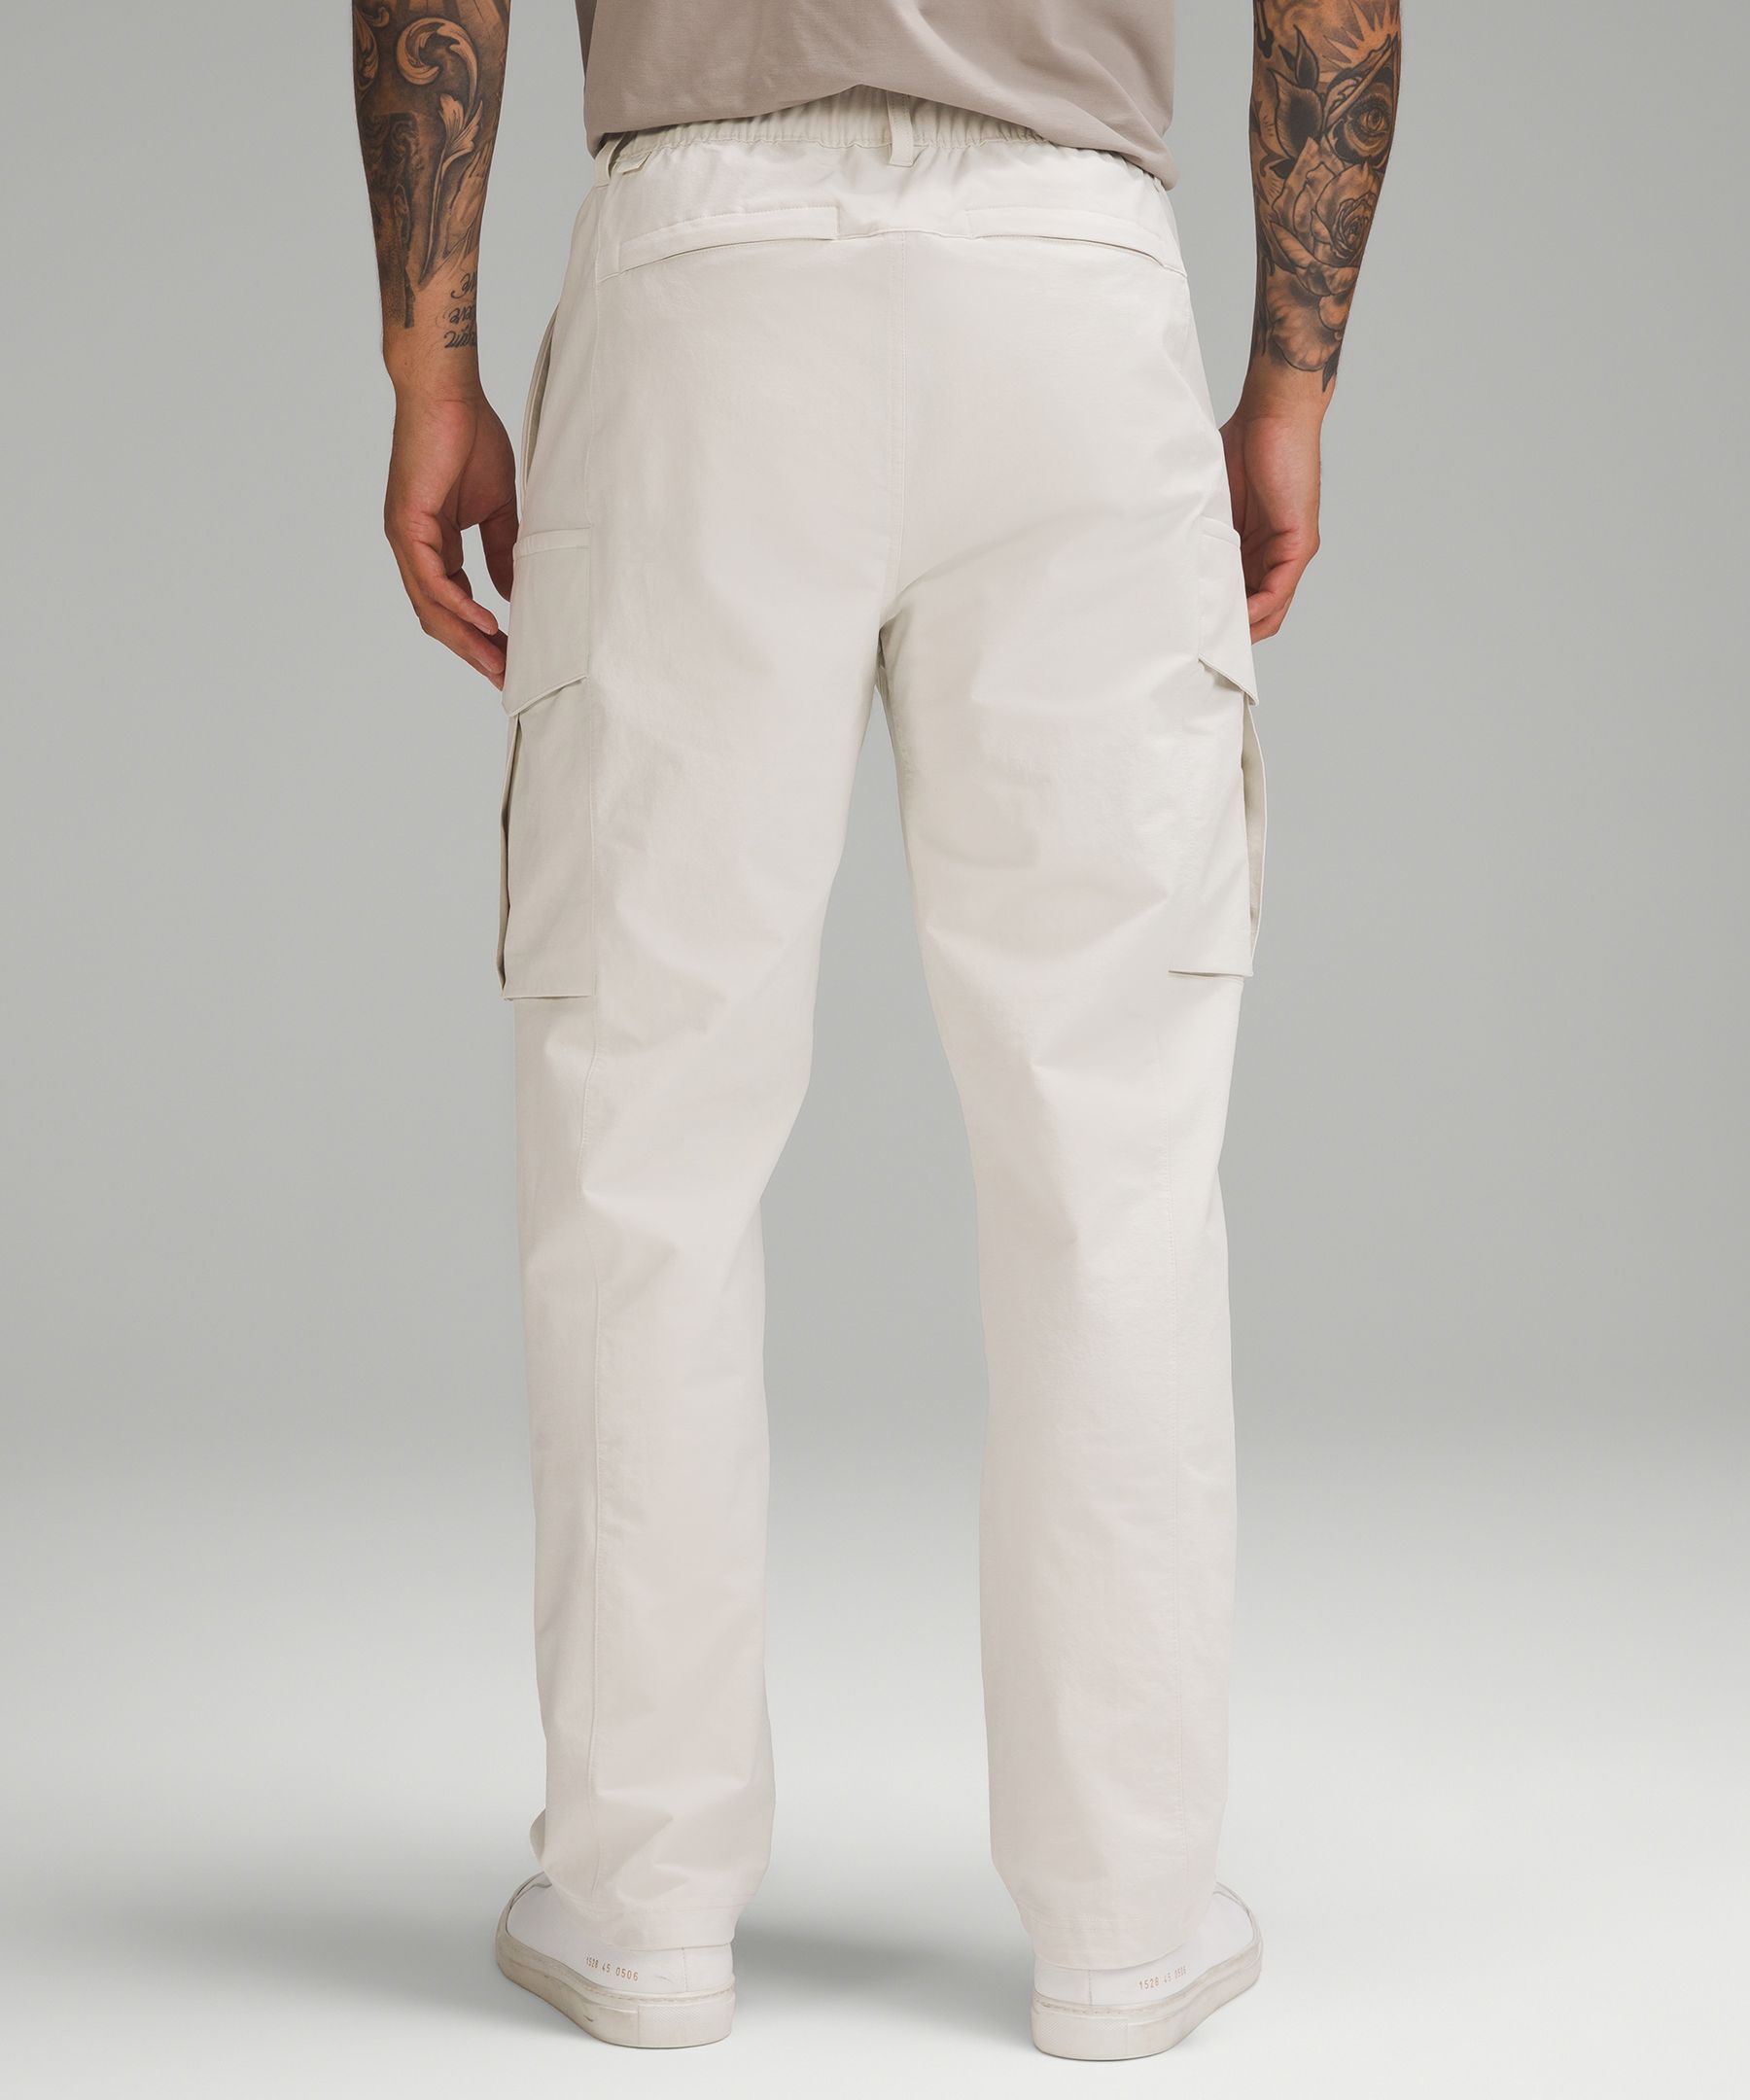 Shop Lululemon Stretch Cotton Versatwill Relaxed-fit Cargo Pants